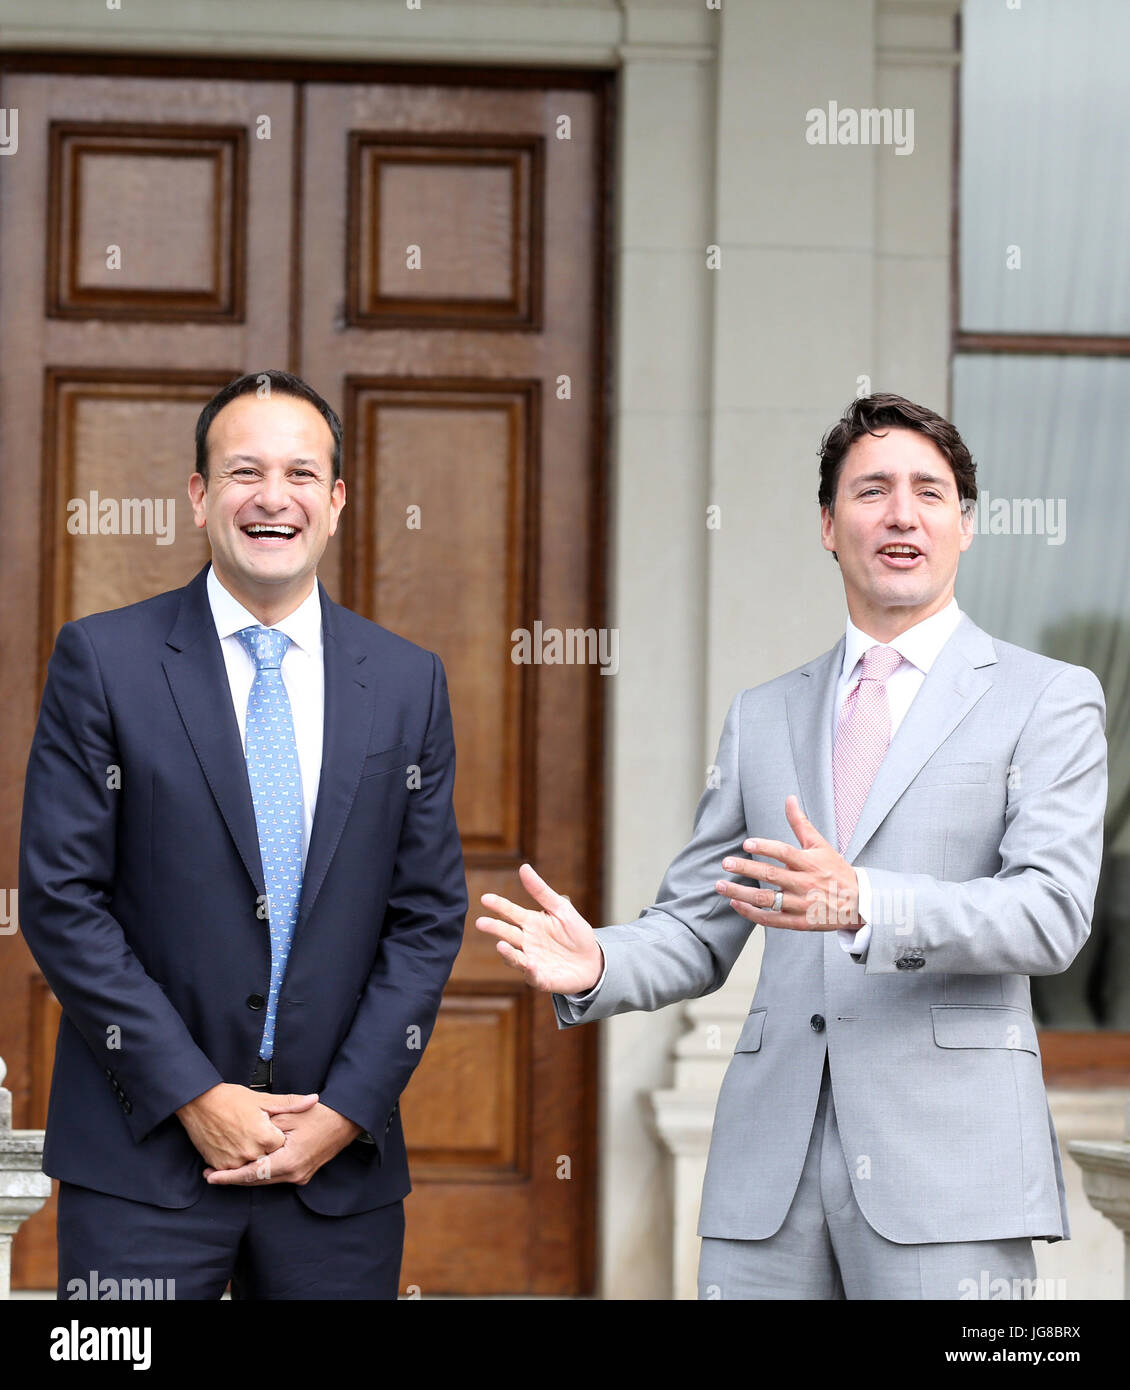 Dublin, Ireland. 4th July, 2017. Justin Trudeau Meets Leo Varadkar in Dublin. The Canadian Prime Minister, Justin Trudeau, today met with Taoiseach and Fine Gael party leader(Prime Minister) Leo Varadkar(left), at Farmleigh House in Dublin. Mr. Trudeau is on a three day visit andÊis expected to discuss trade between the two countries and the implications of Brexit and a possible hard border, for the Irish economy and its relations with the United Kingdom. Mr Varadkar is Ireland's first gay political leader. Photo: Sam Boal/RollingNews.ie/Alamy Live News Stock Photo